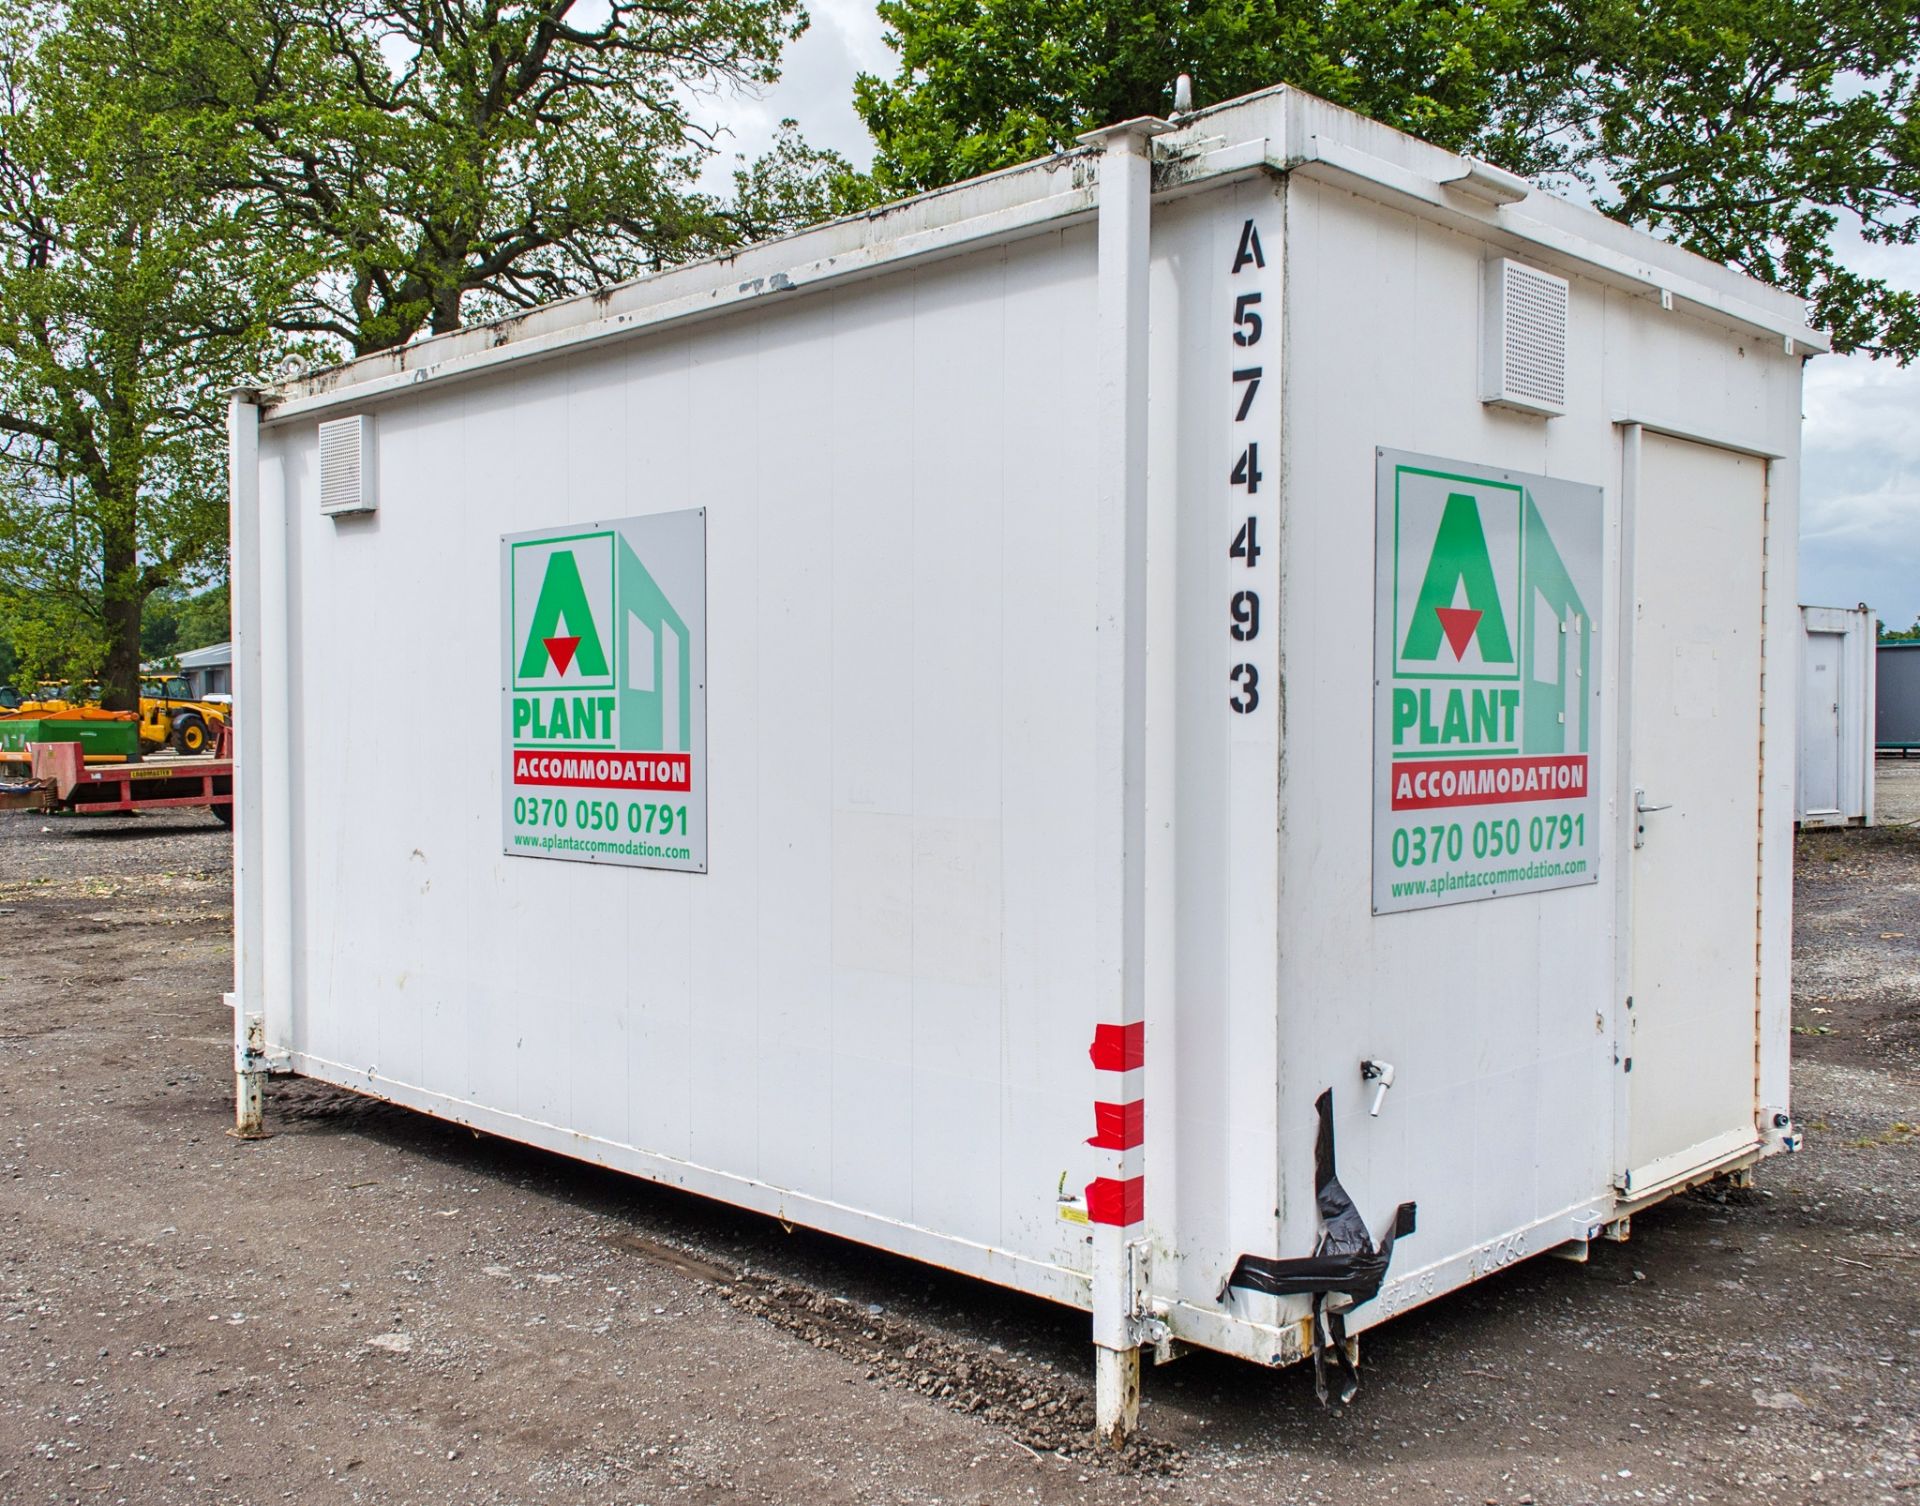 16 ft x 9 ft steel 3 + 1 toilet site unit Comprising of: Gents toilet (3 - cubicles, 3 - urinals & 2 - Image 3 of 11